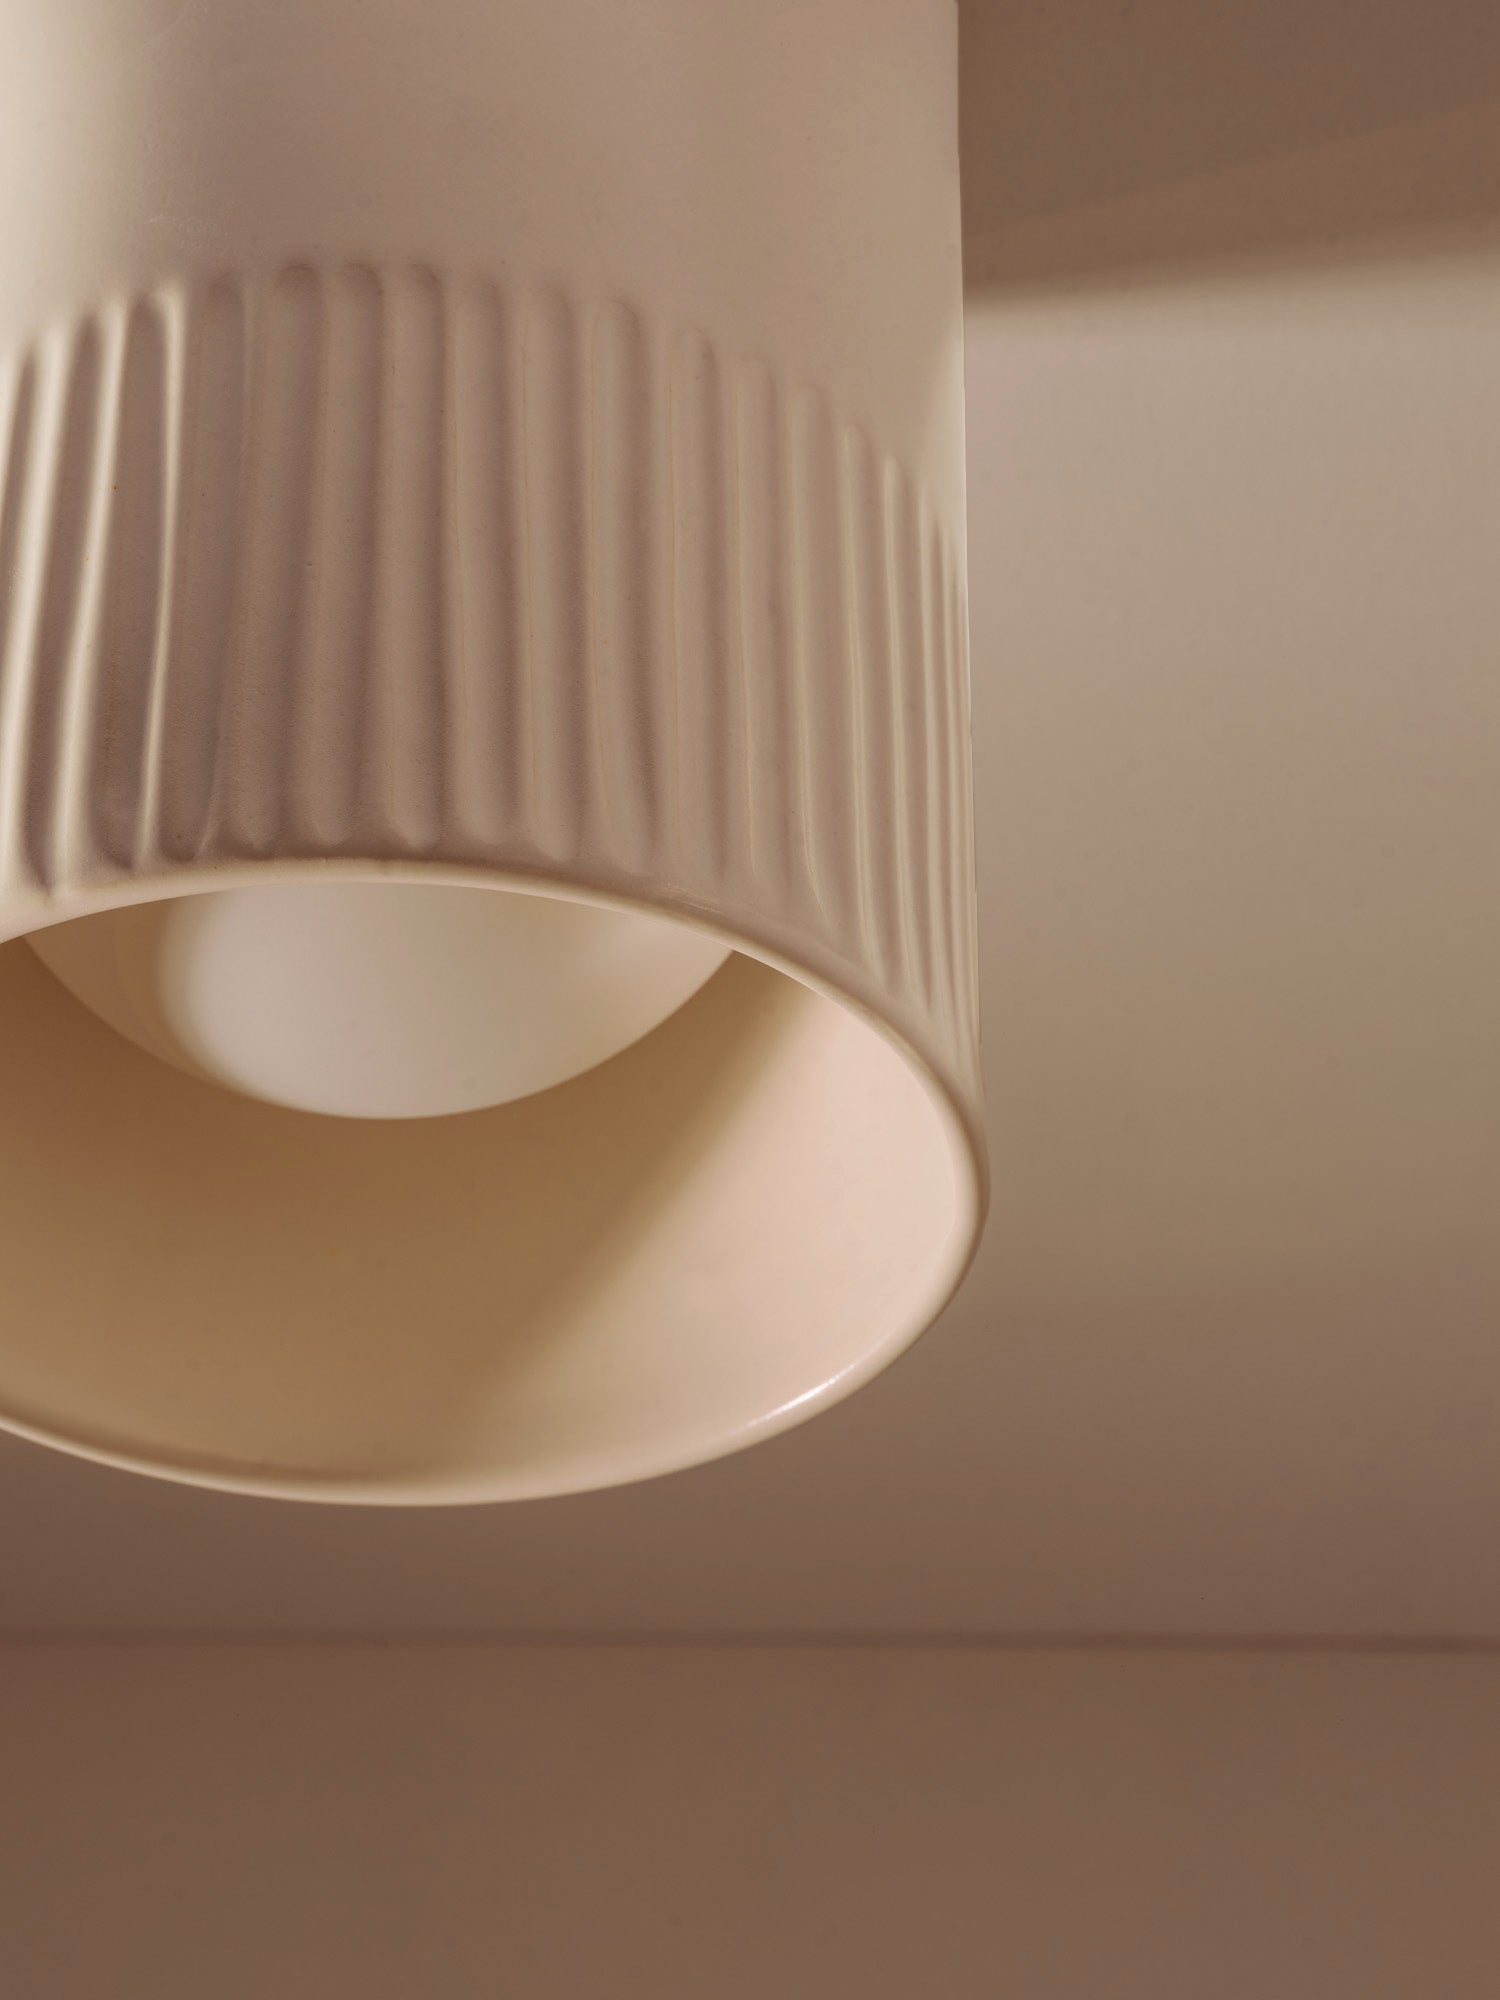 Day Surface Mount Ceramic Ceiling Light